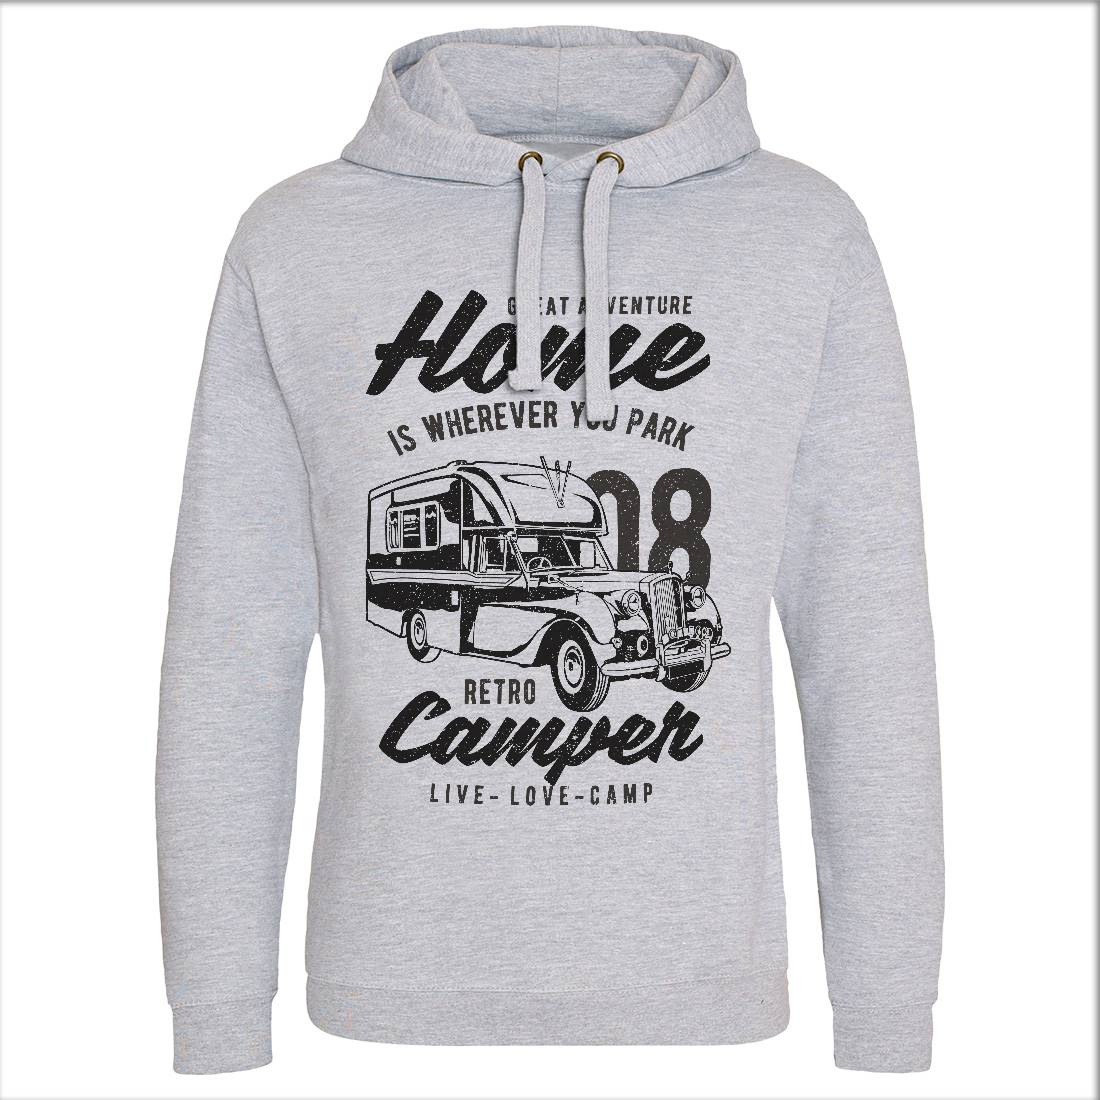 Retro Campers Mens Hoodie Without Pocket Nature A740